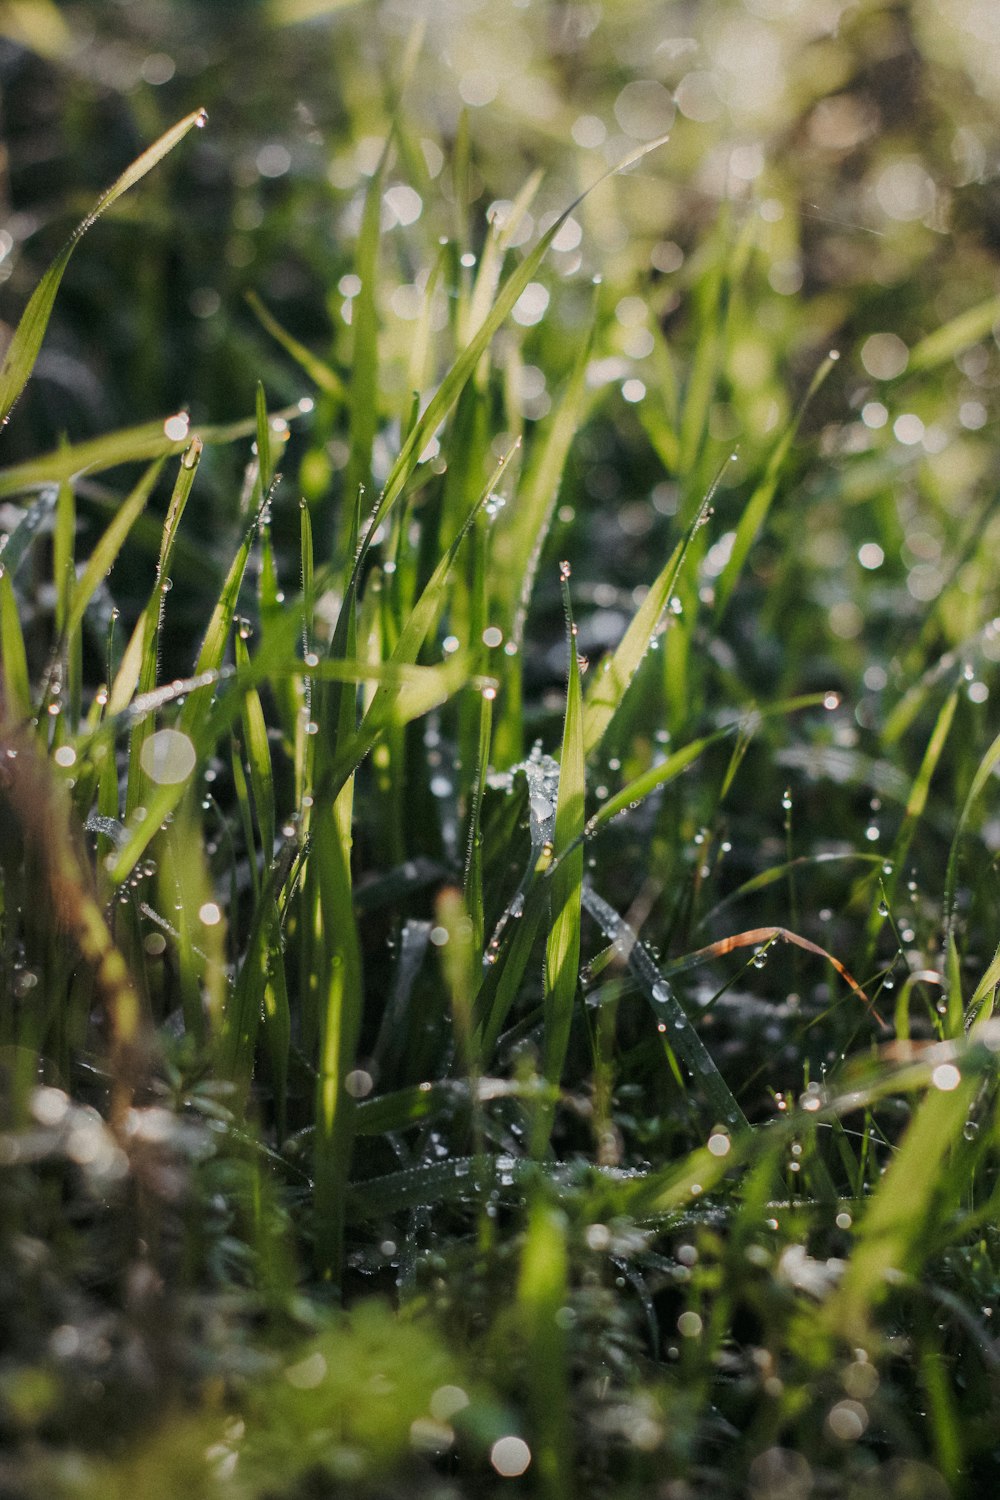 a close up of grass with water droplets on it